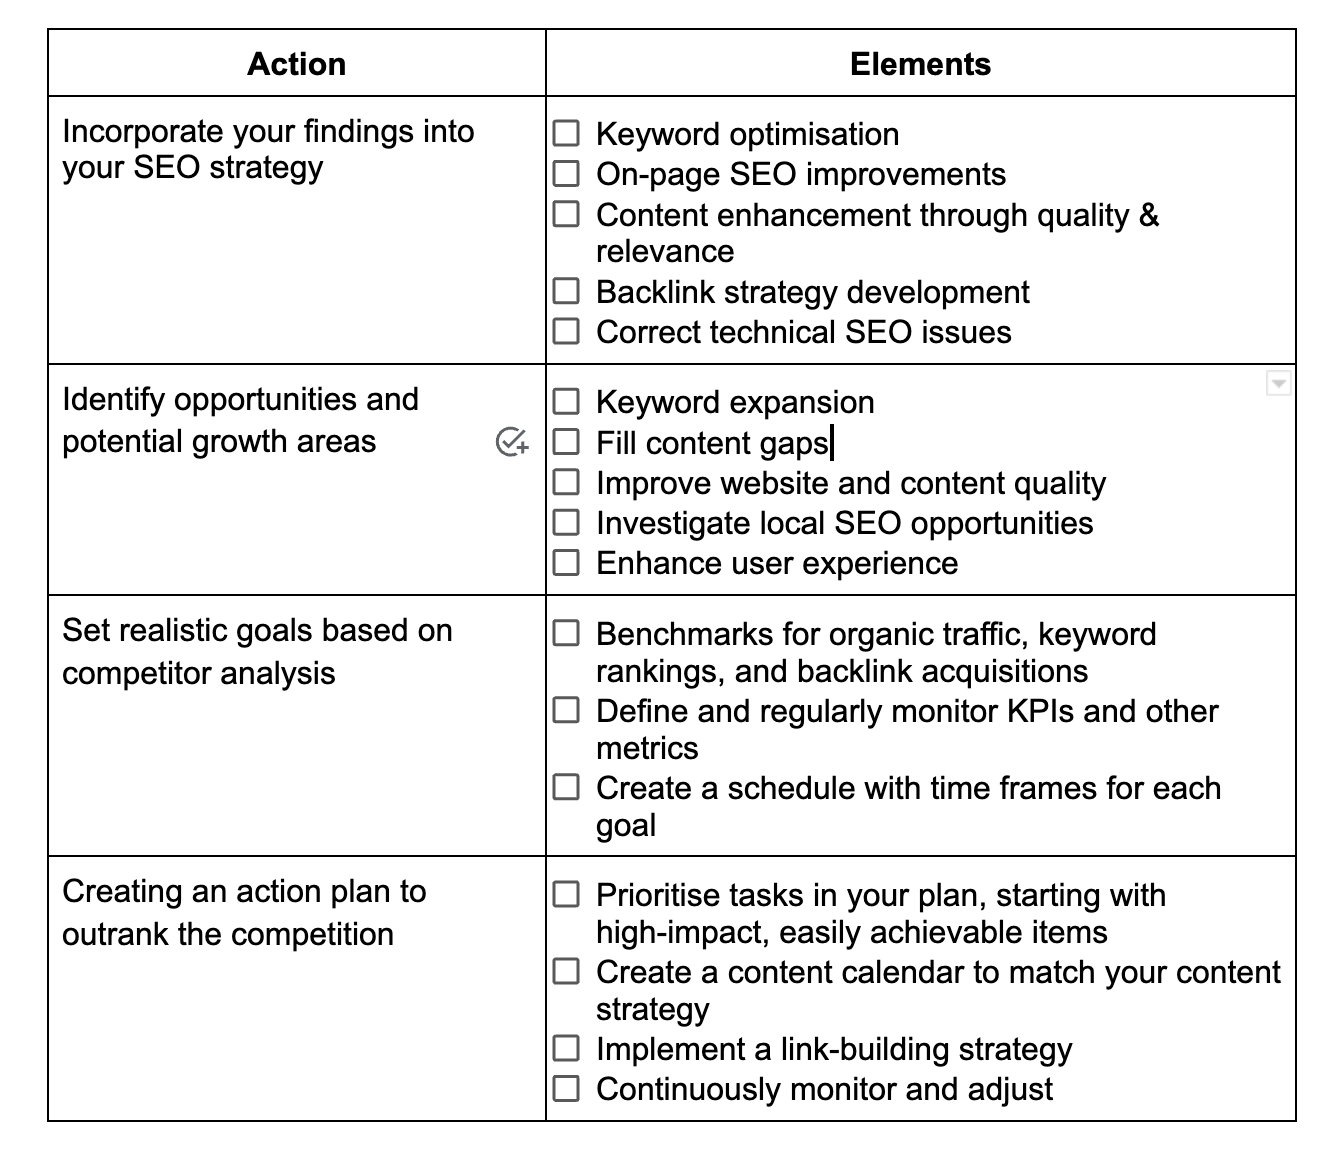 Table showing actionable steps to improve SEO strategy.